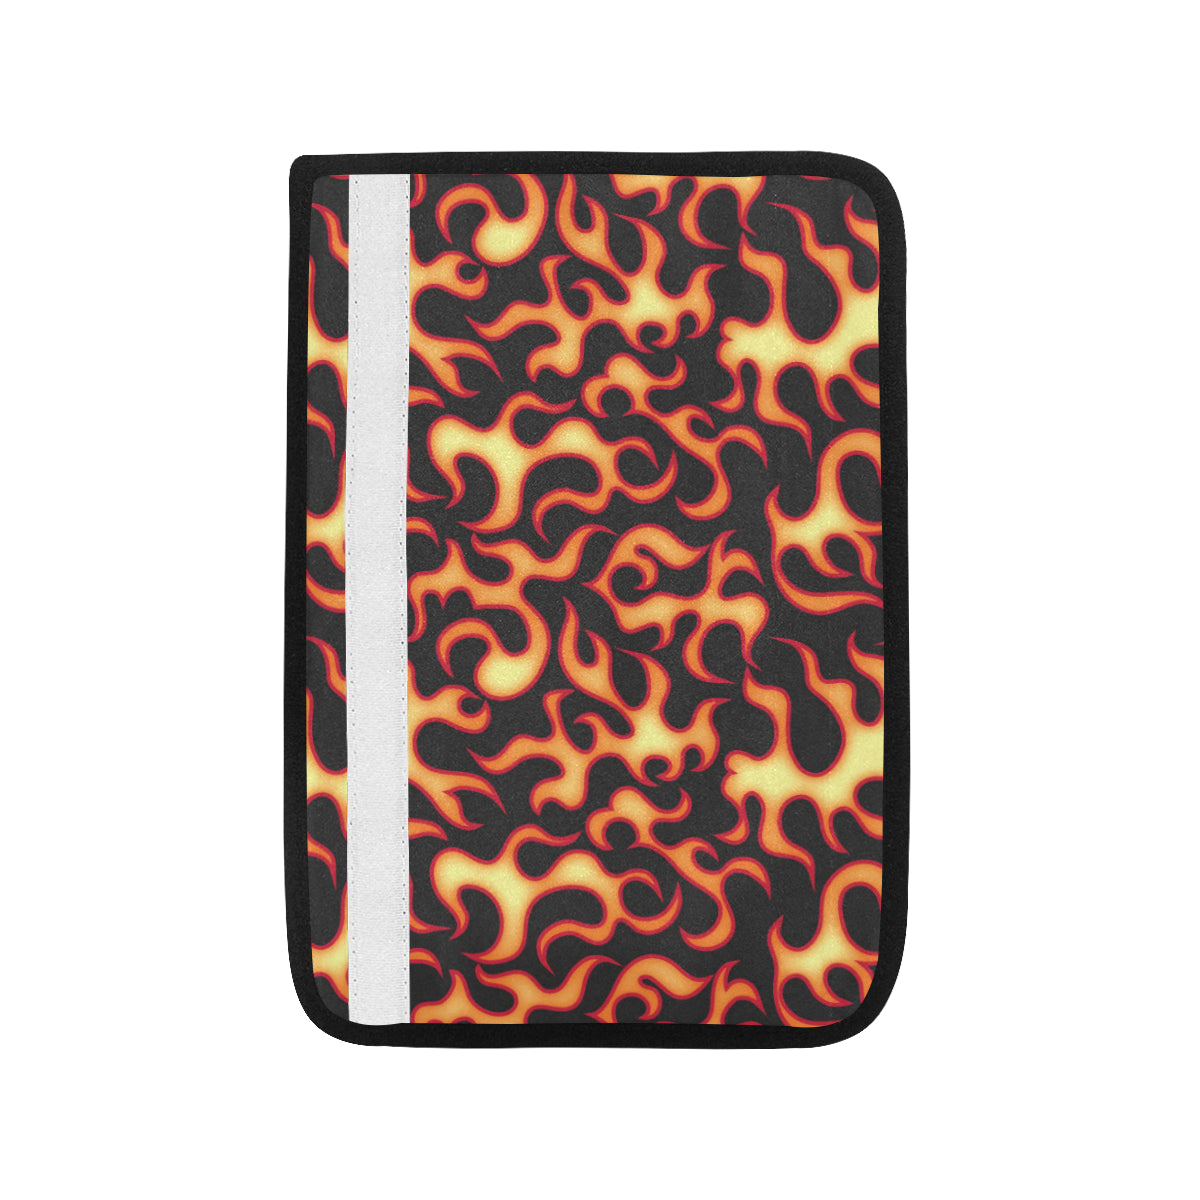 Flame Fire Themed Print Car Seat Belt Cover